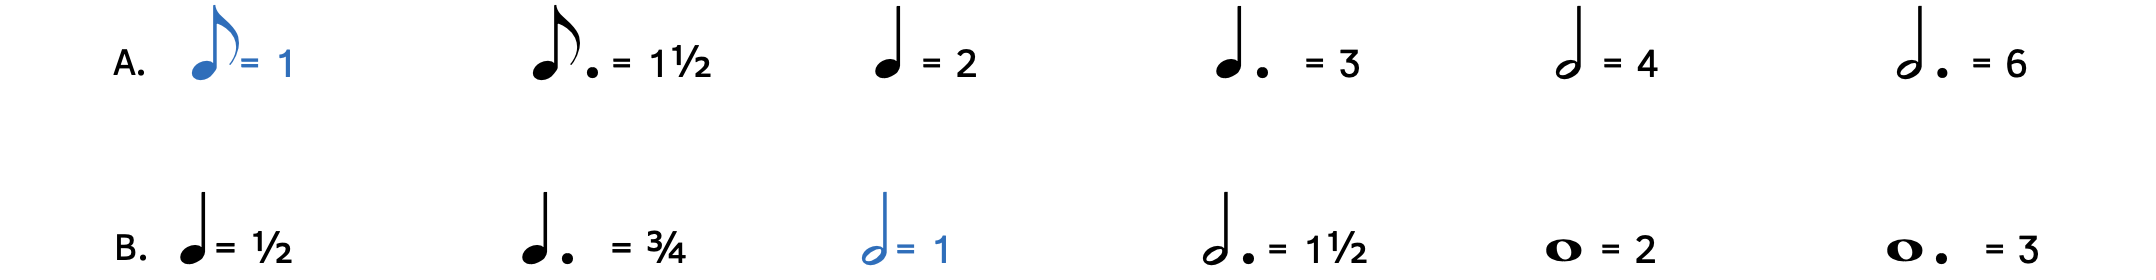 Examples of different note values with and without dots. Example A shows that if an eighth note is equal to 1, a dotted eighth note is equal to 1 and a half, a quarter note is equal to 2, a dotted quarter note is equal to 3, a half note is equal to 4, and a dotted half note is equal to 6. Example B shows that if a half note equals 1, a quarter note is equal to one half, a dotted quarter note is equal to three-fourths, a dotted half note is equal to one and a half, a whole note is equal to 2, and a dotted whole note is equal to 3.